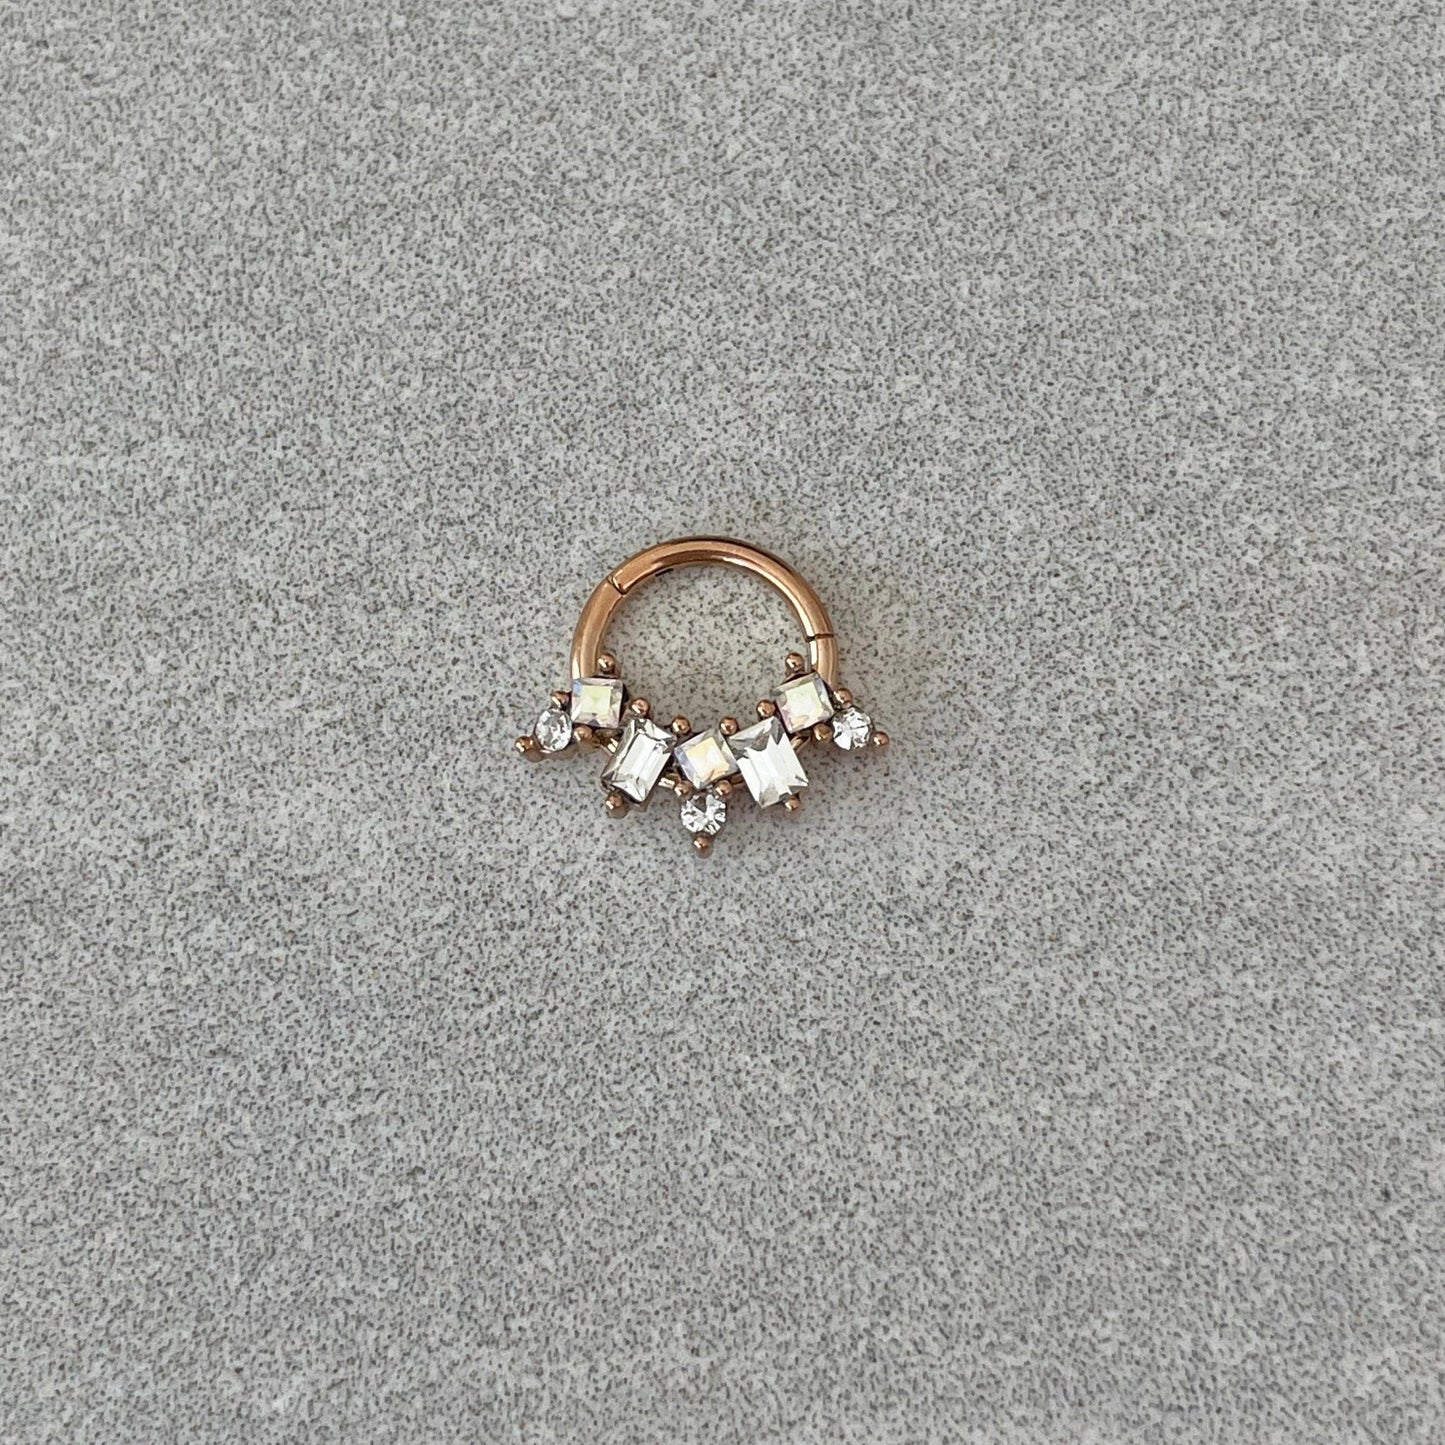 Unique Rose Gold Daith Earring (16G | 8mm | Surgical Steel | Rose Gold, Silver, or Gold)